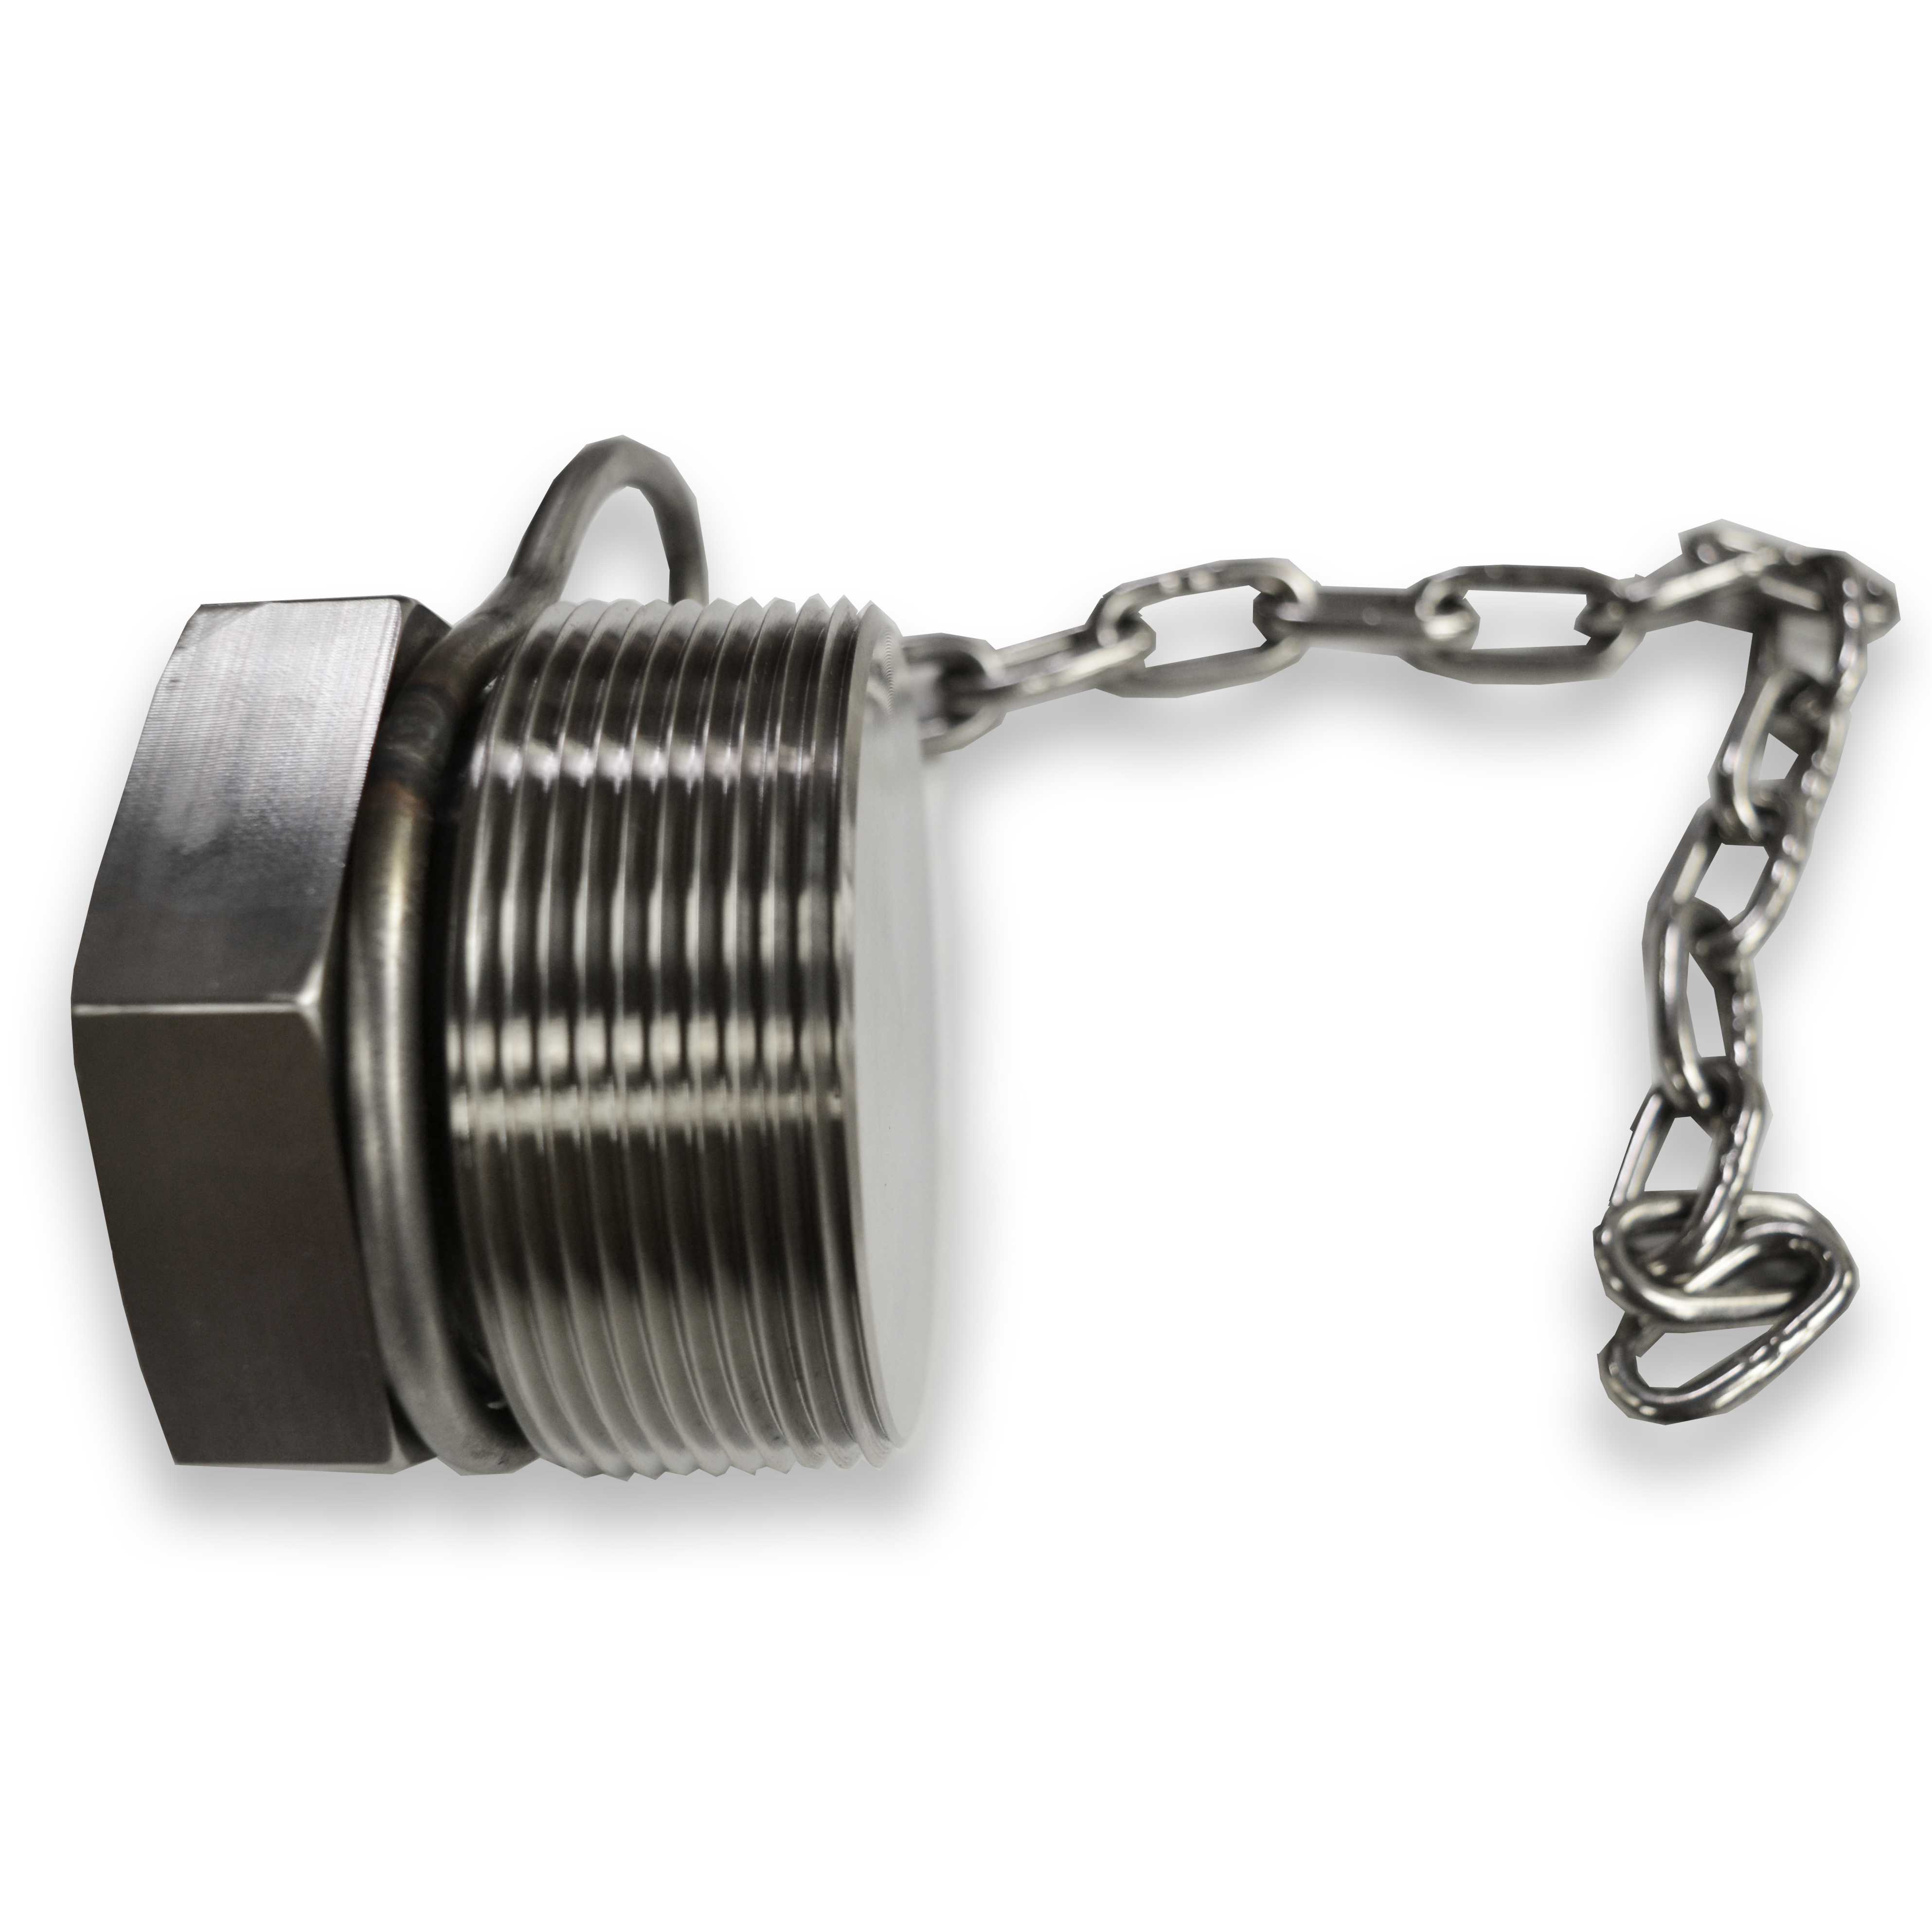 3-Inch Nitronic 60 Plug Assembly with Stainless Steel Chain